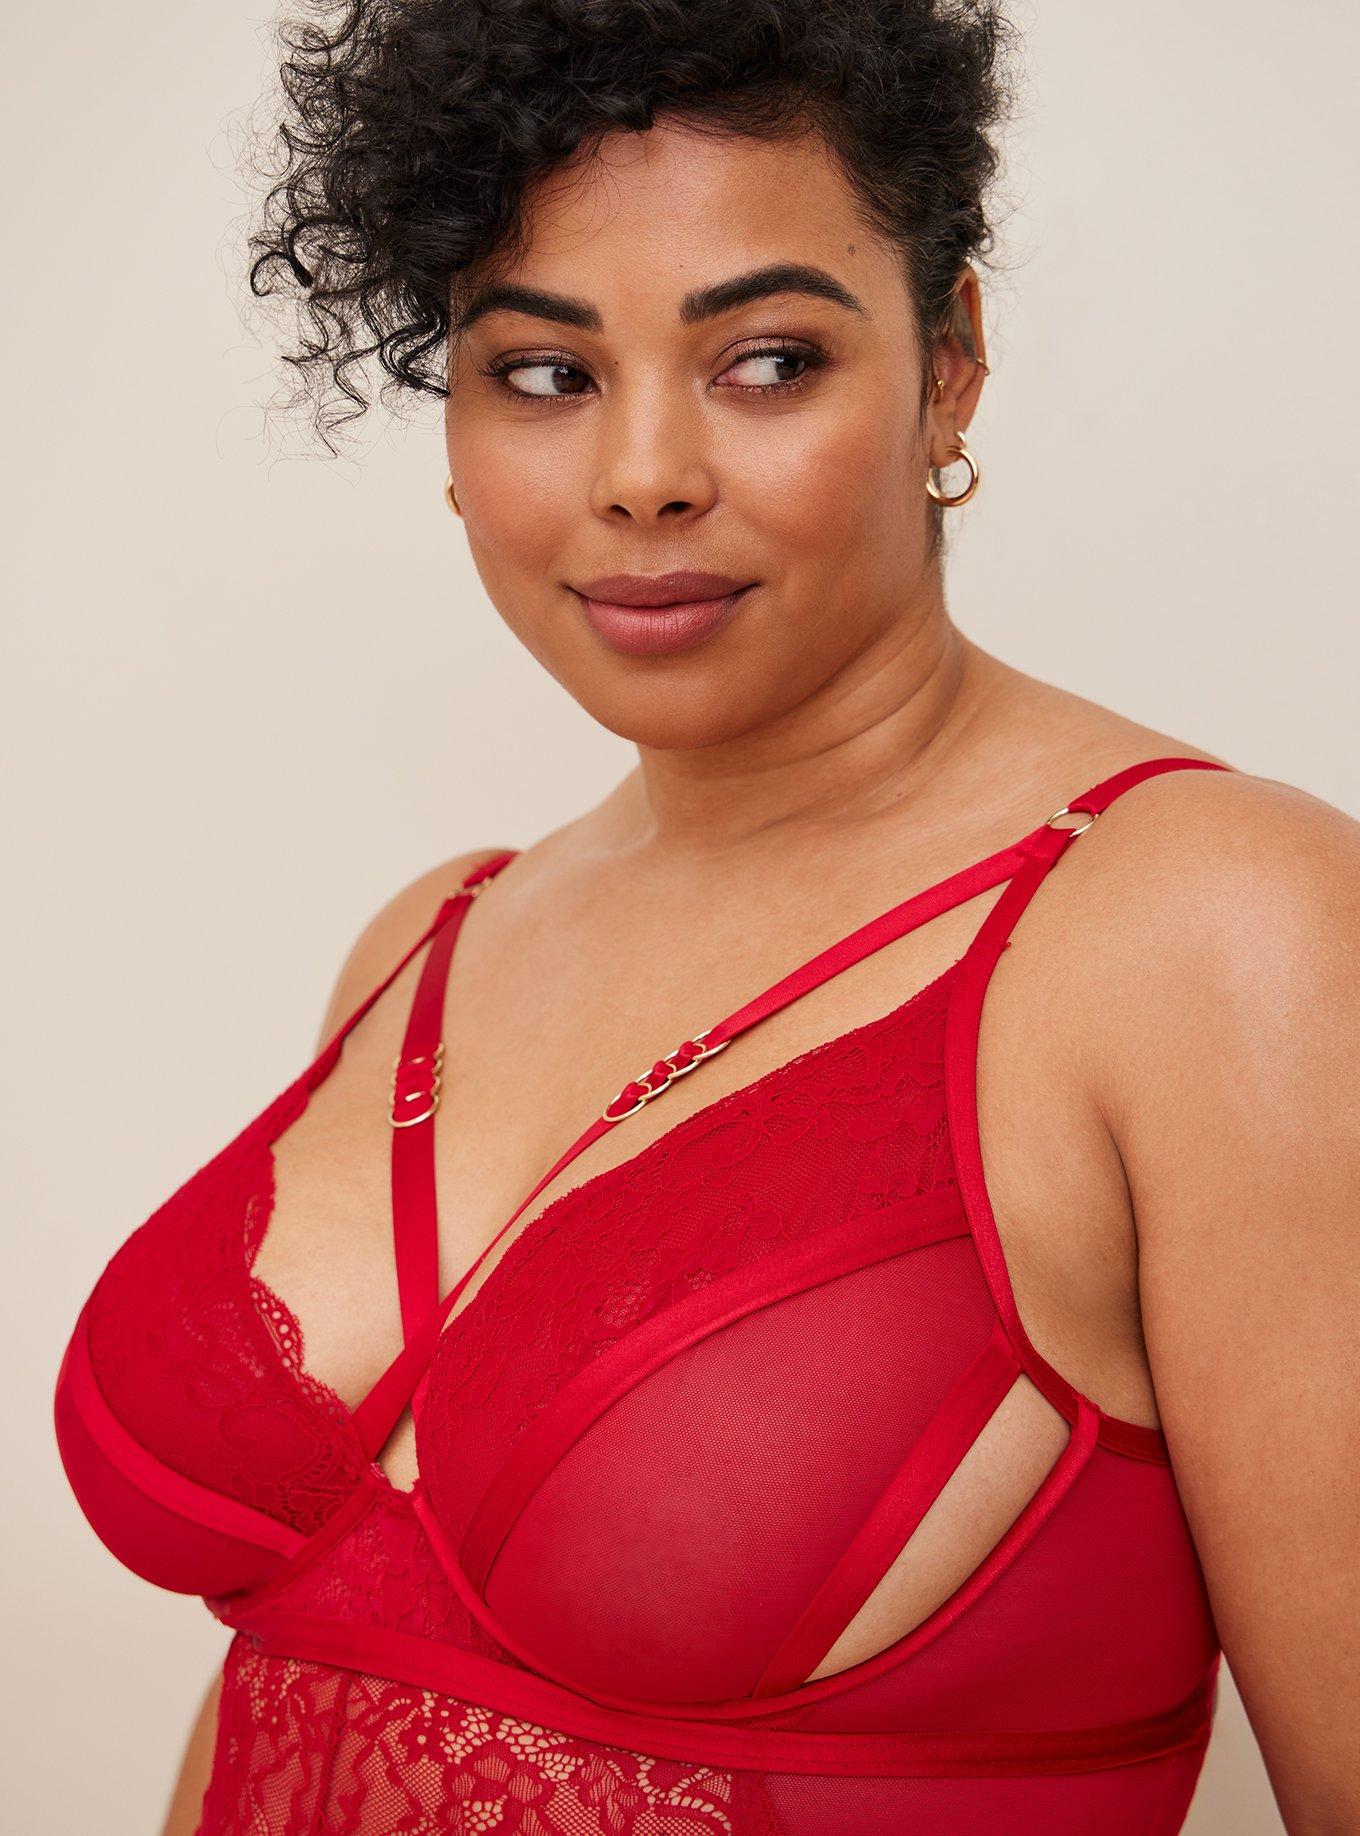 NWT TORRID SIZE 48B PUSH-UP PLUNGE STRAPPY V BRA - LACE RED